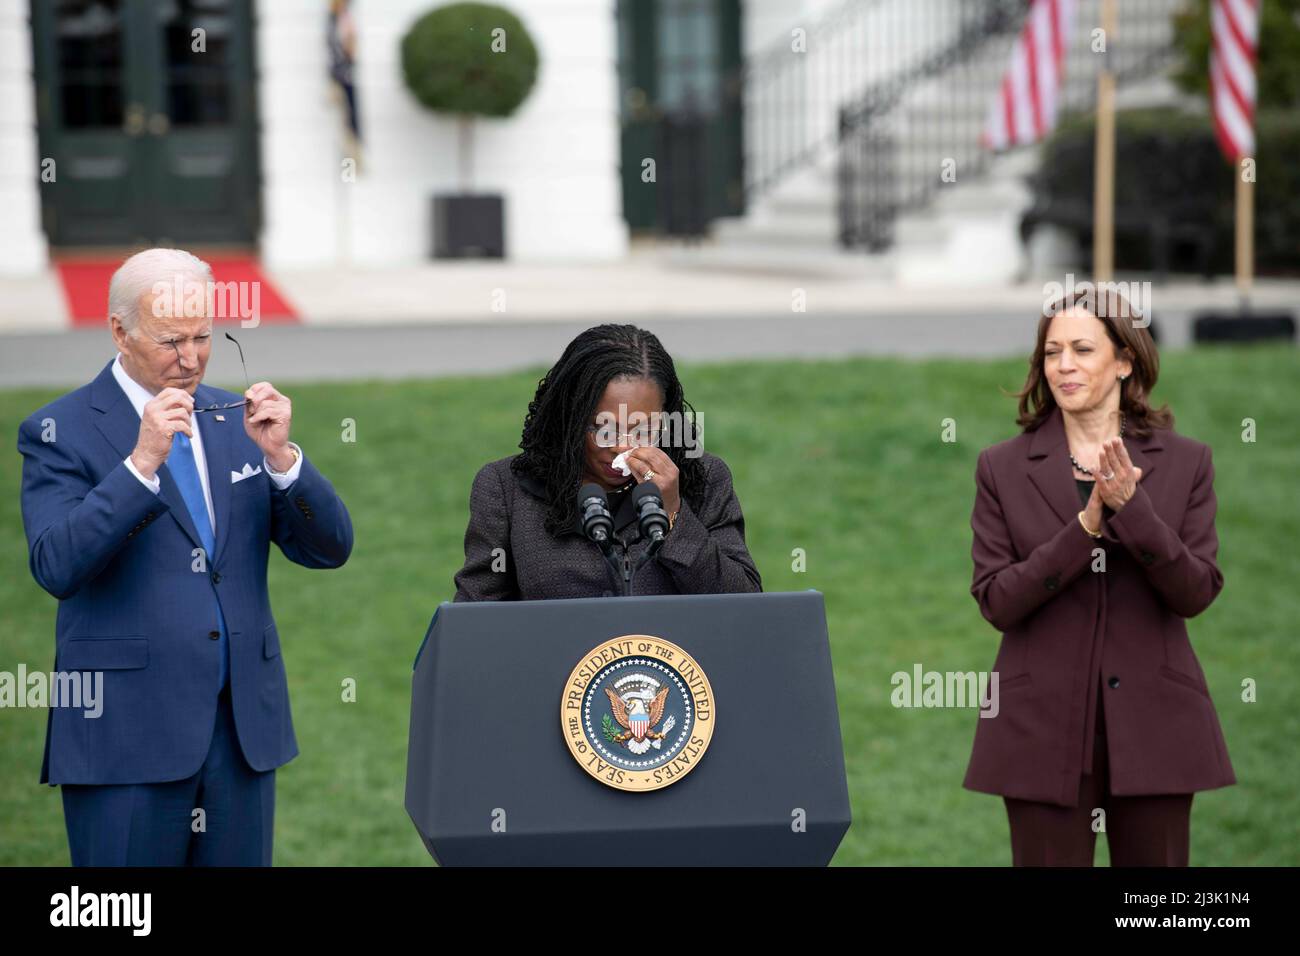 Washington, USA. 8th Apr, 2022. Judge Ketanji Brown Jackson (C), U.S. President Joe Biden (L) and Vice President Kamala Harris attend an event marking the Senate confirmation of Jackson for the Supreme Court at the South Lawn of the White House in Washington, DC, the United States, on April 8, 2022. The White House held the event Friday afternoon to mark the Senate confirmation of the first African American woman for the Supreme Court. Credit: Liu Jie/Xinhua/Alamy Live News Stock Photo